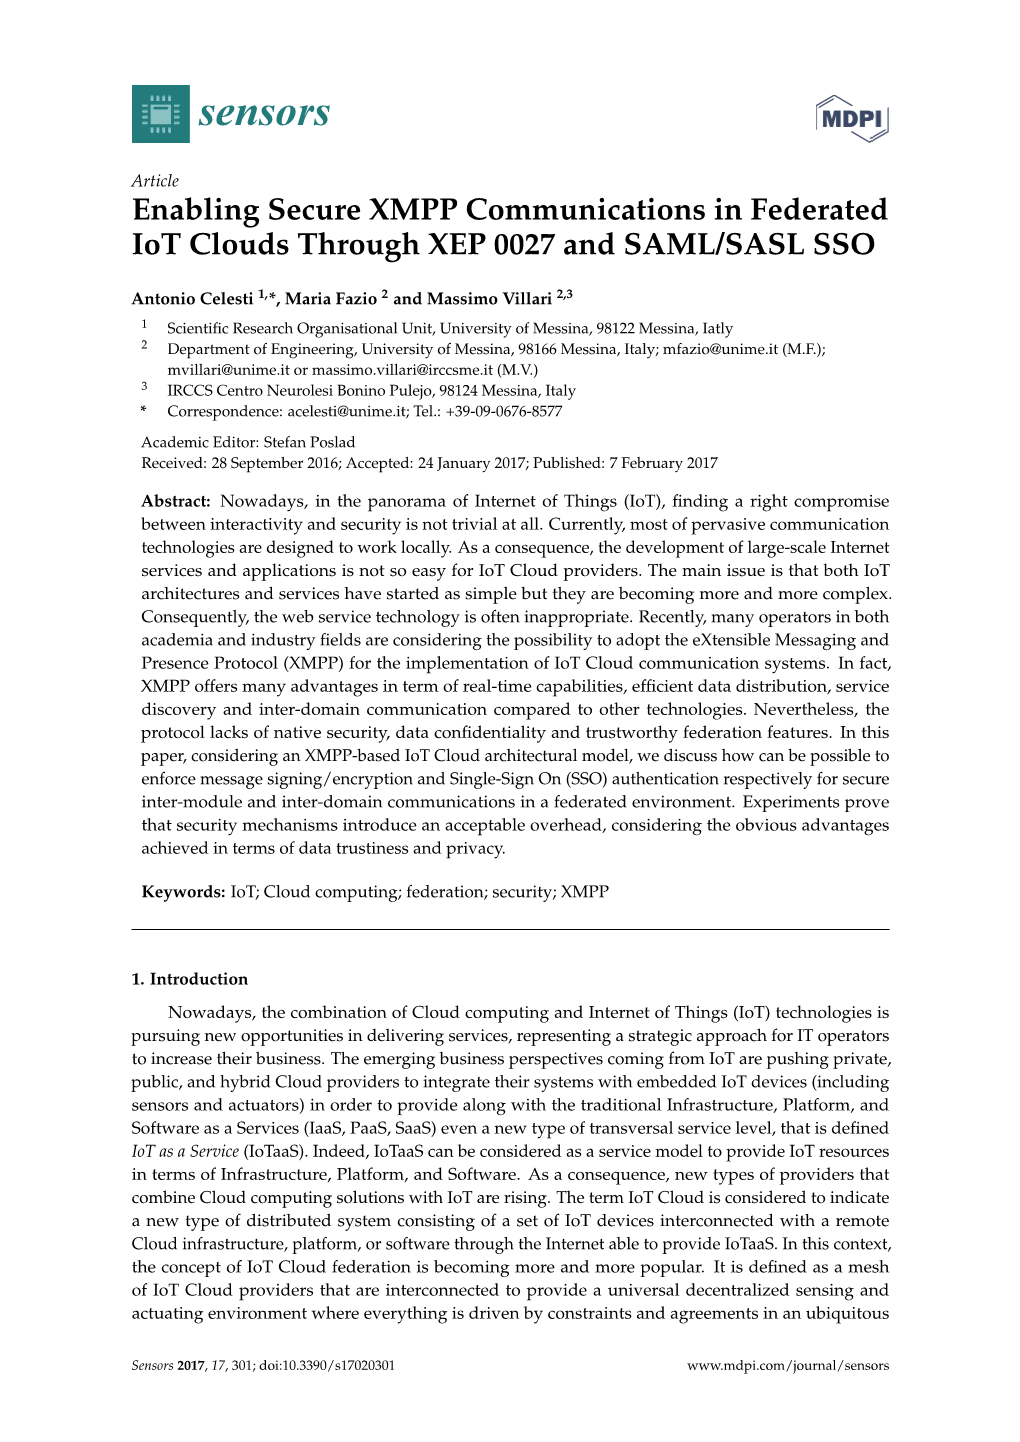 Enabling Secure XMPP Communications in Federated Iot Clouds Through XEP 0027 and SAML/SASL SSO